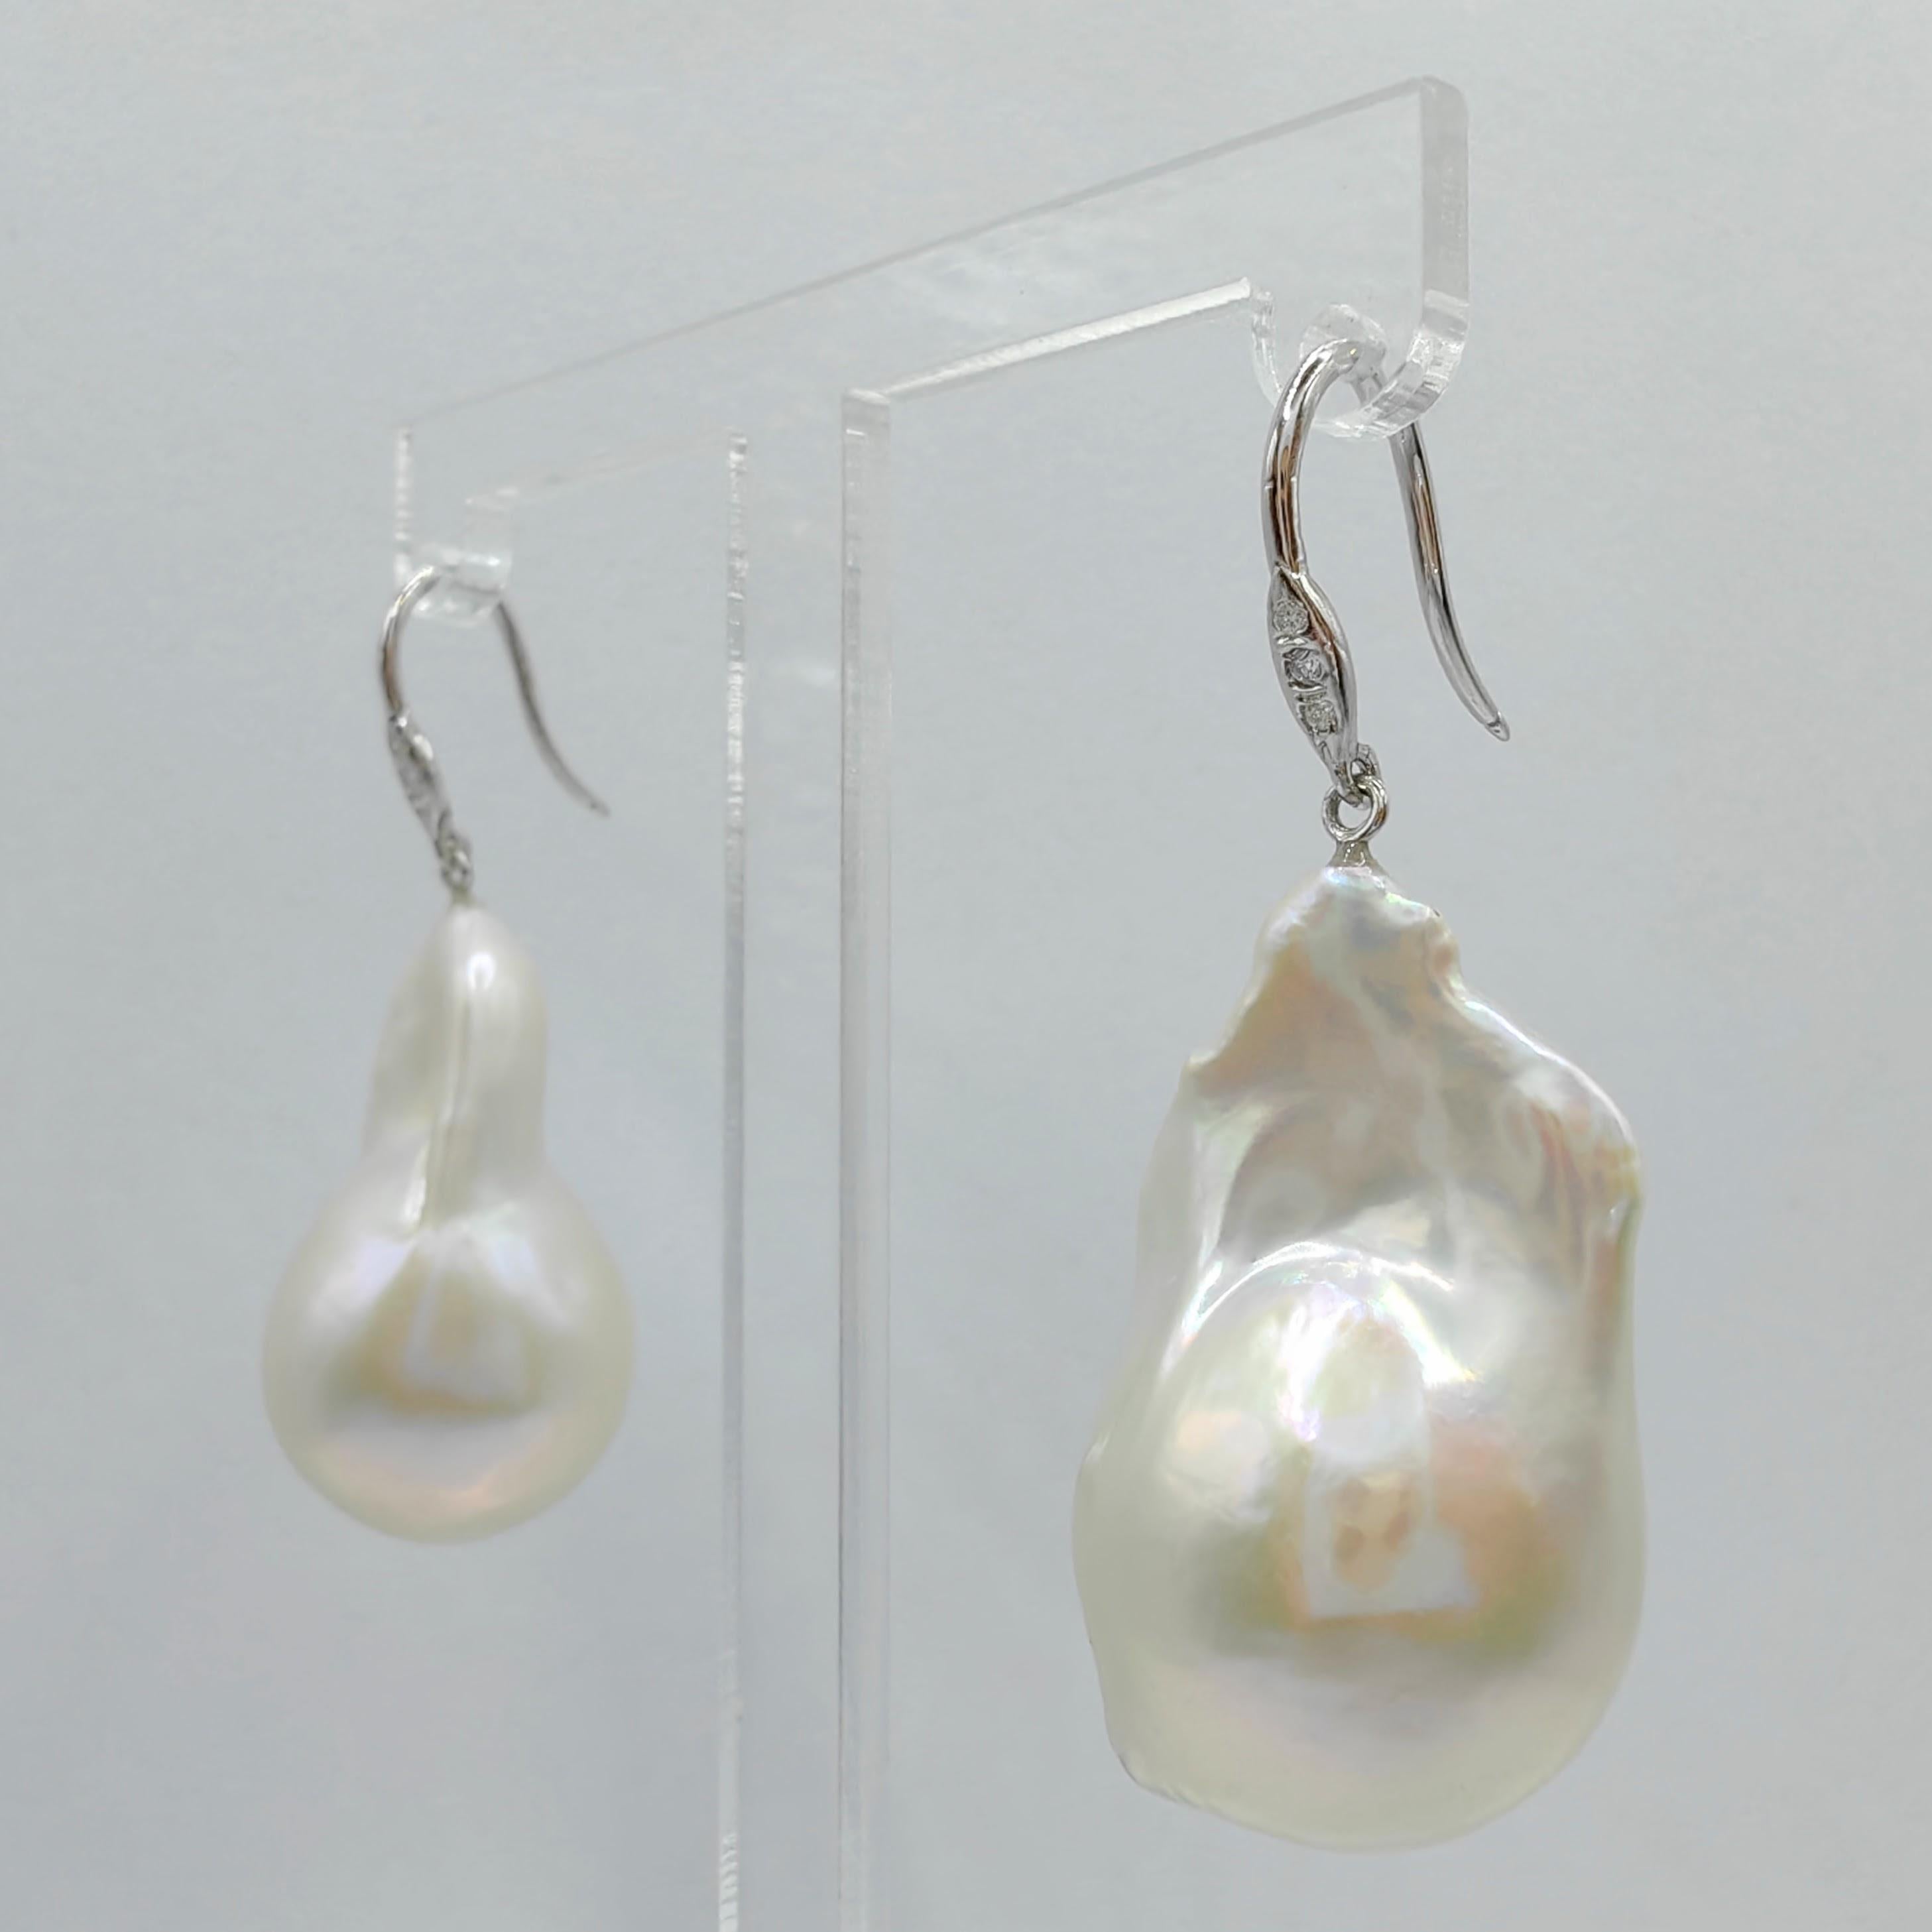 Contemporary Baroque Pearl Diamond Dangling Drop Earrings With 18K White Gold French Hooks For Sale